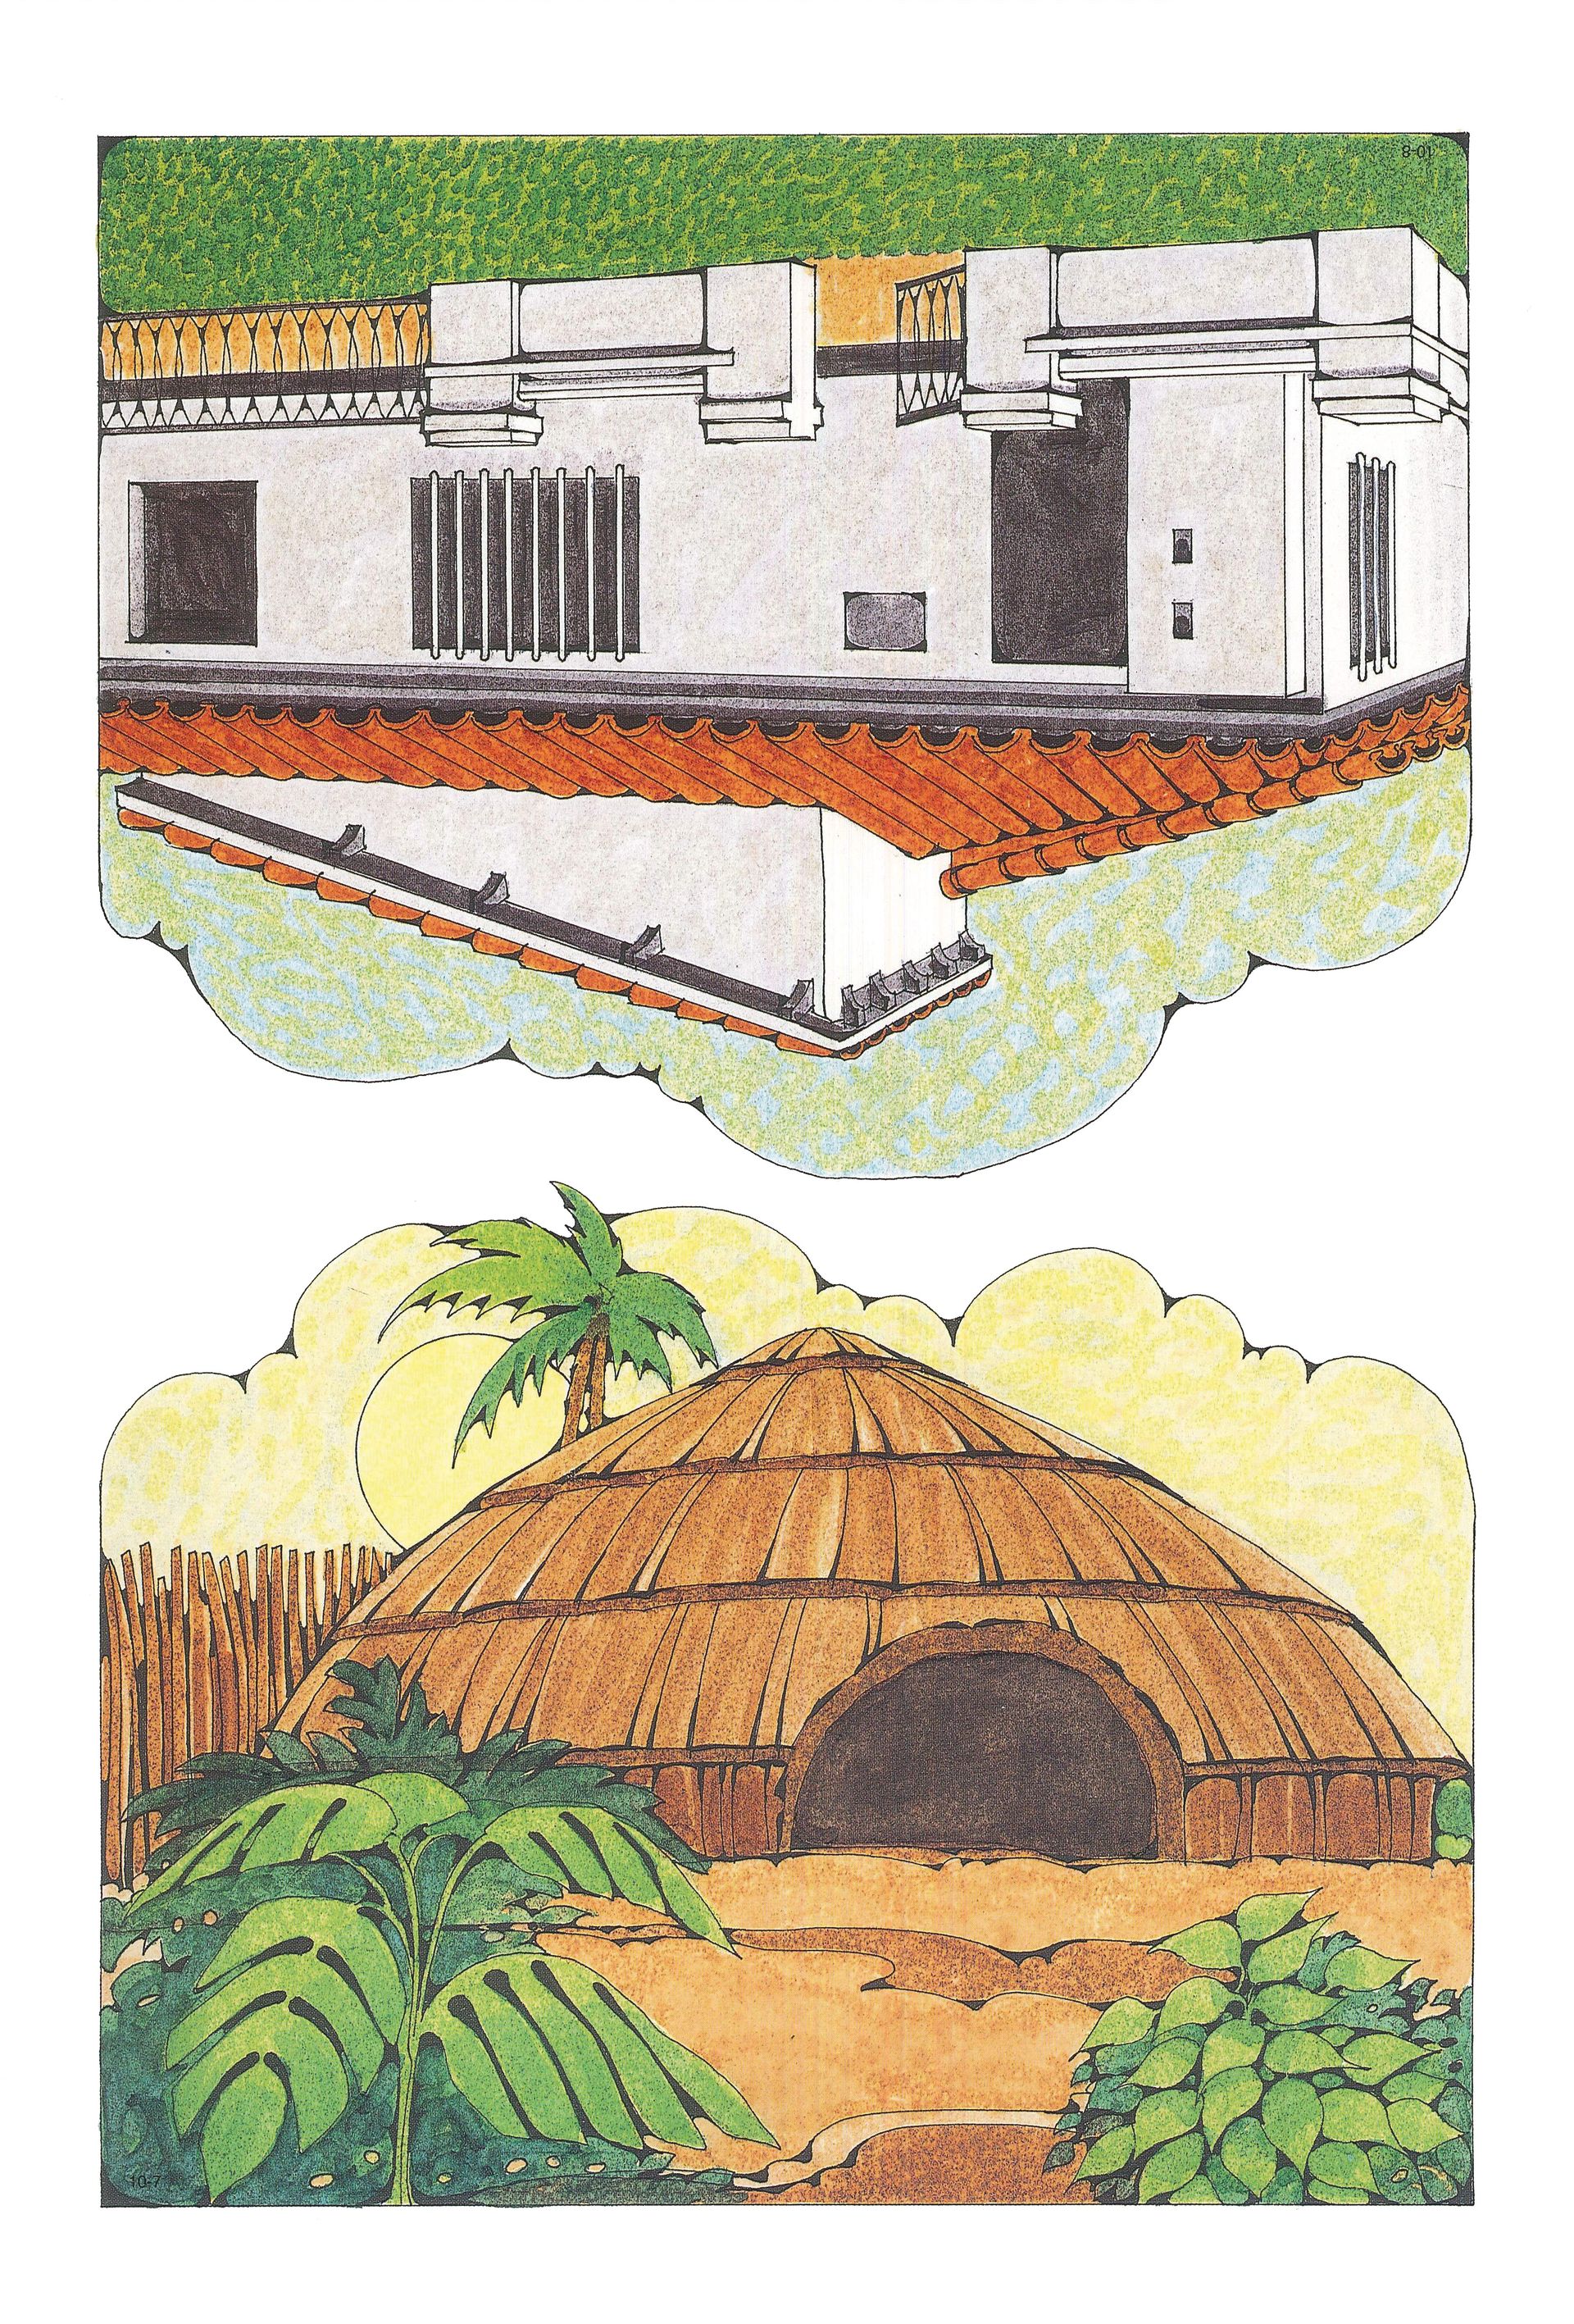 Primary Visual Aids: Cutouts 10-7, Subtropical, Tropical Home; 10-8, Spanish-Style Home.